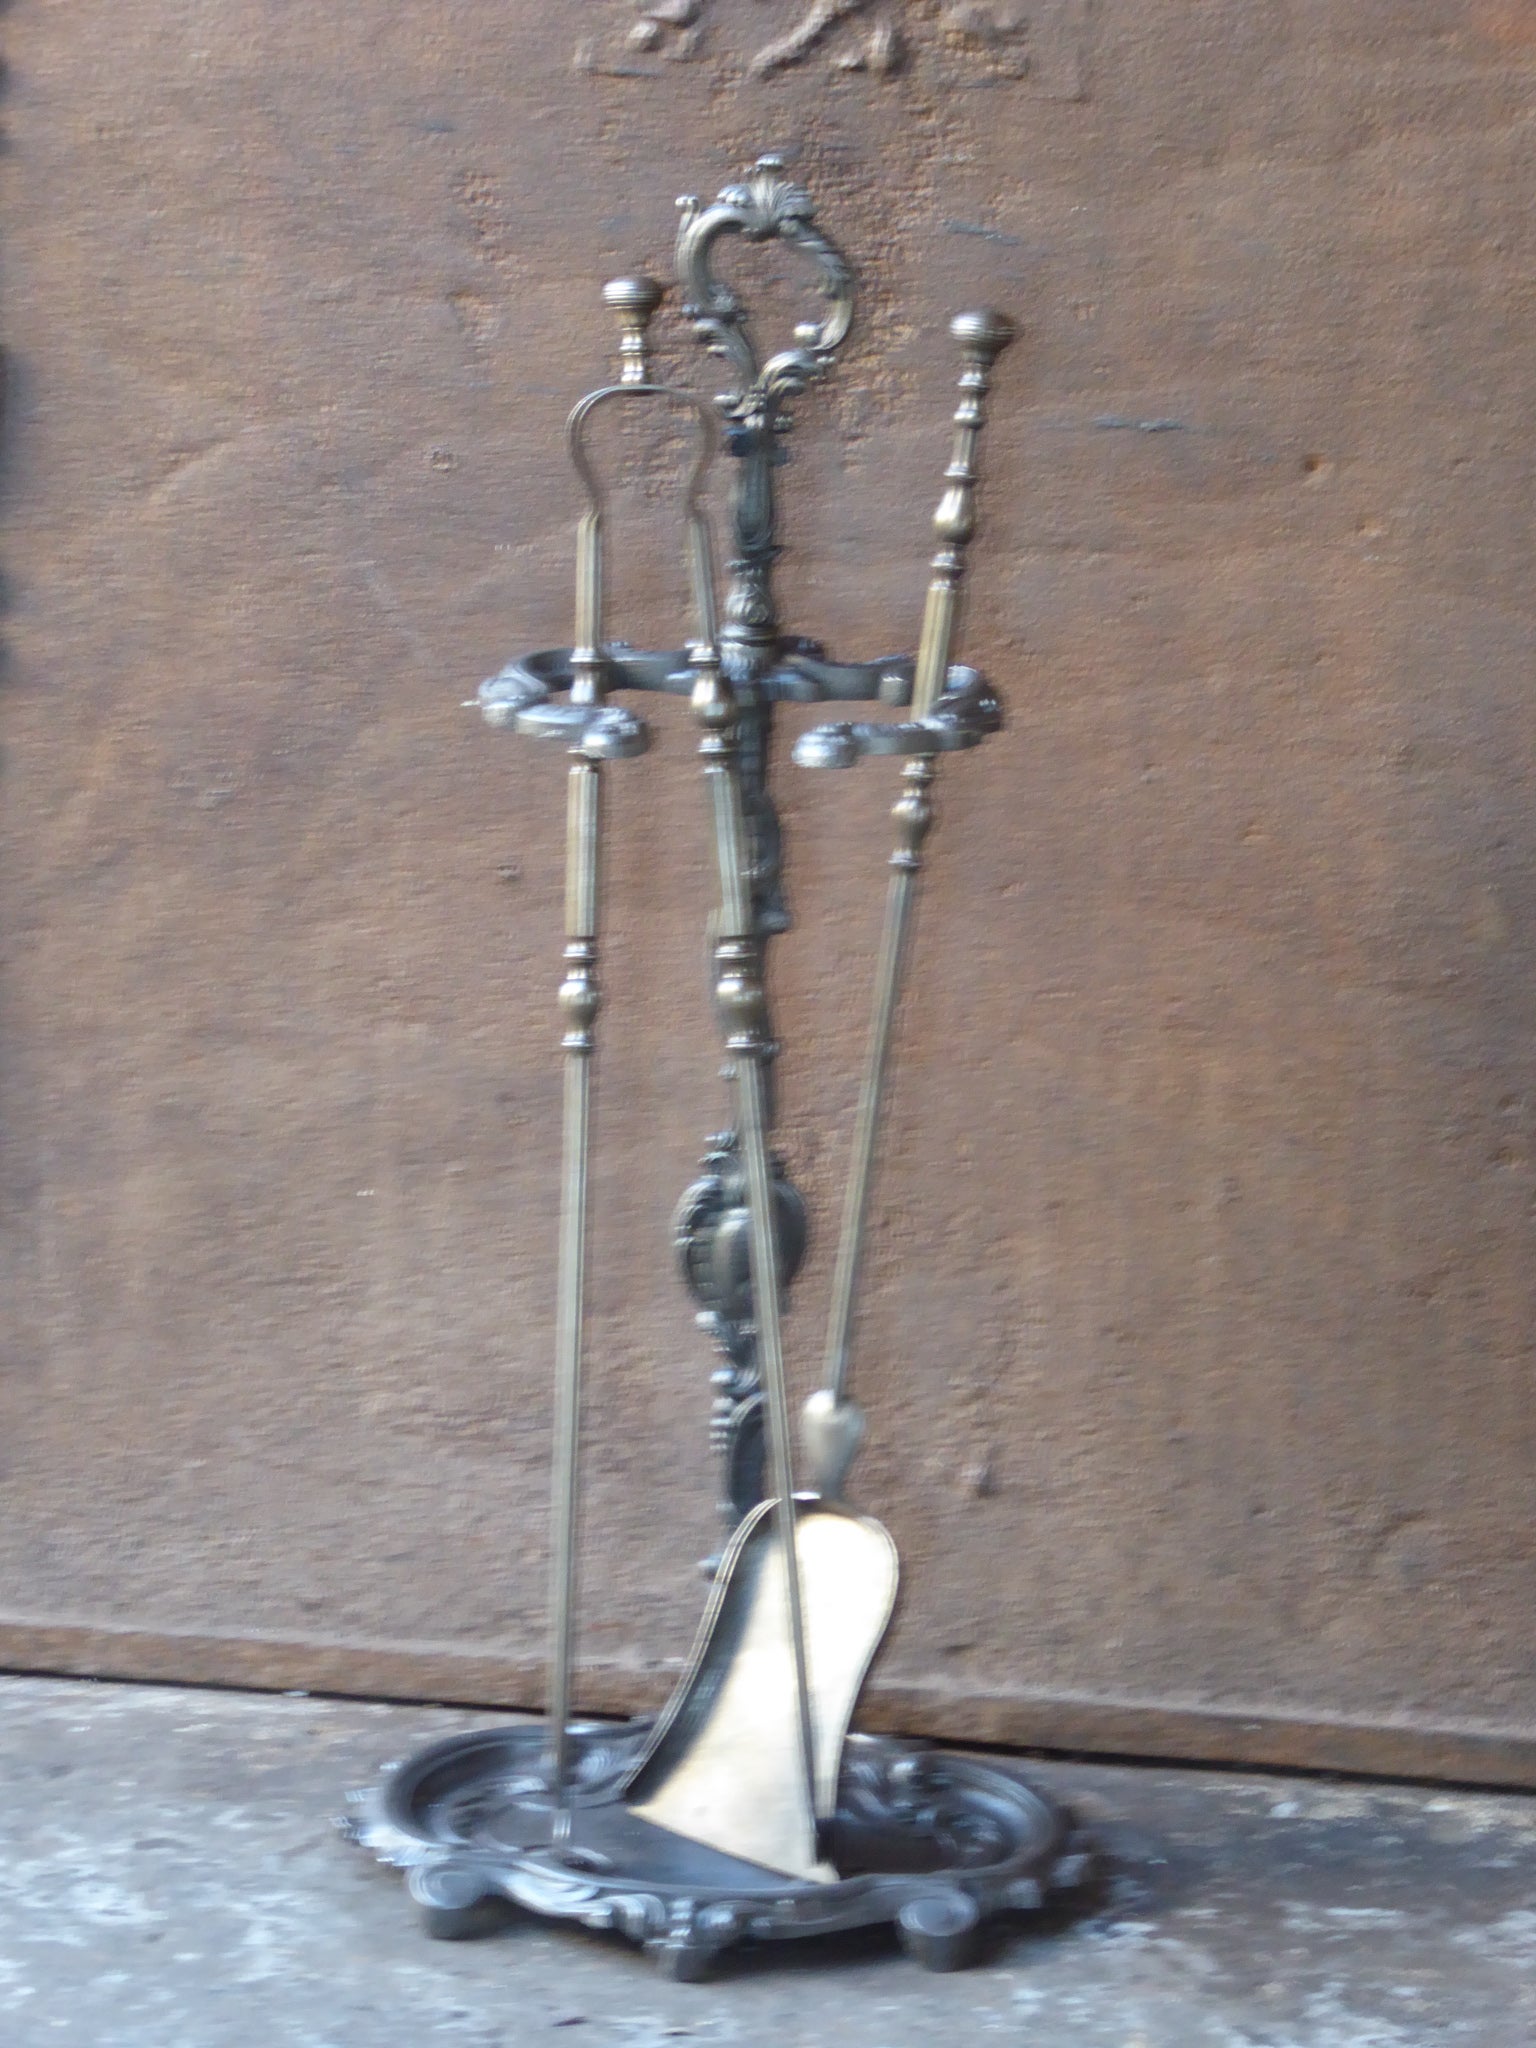 19th century French Napoleon III fireplace tool set. The toolset consists of a stand and two fire irons. Made of wrought iron and cast iron. It is in a good condition and is fully functional.
 
 





